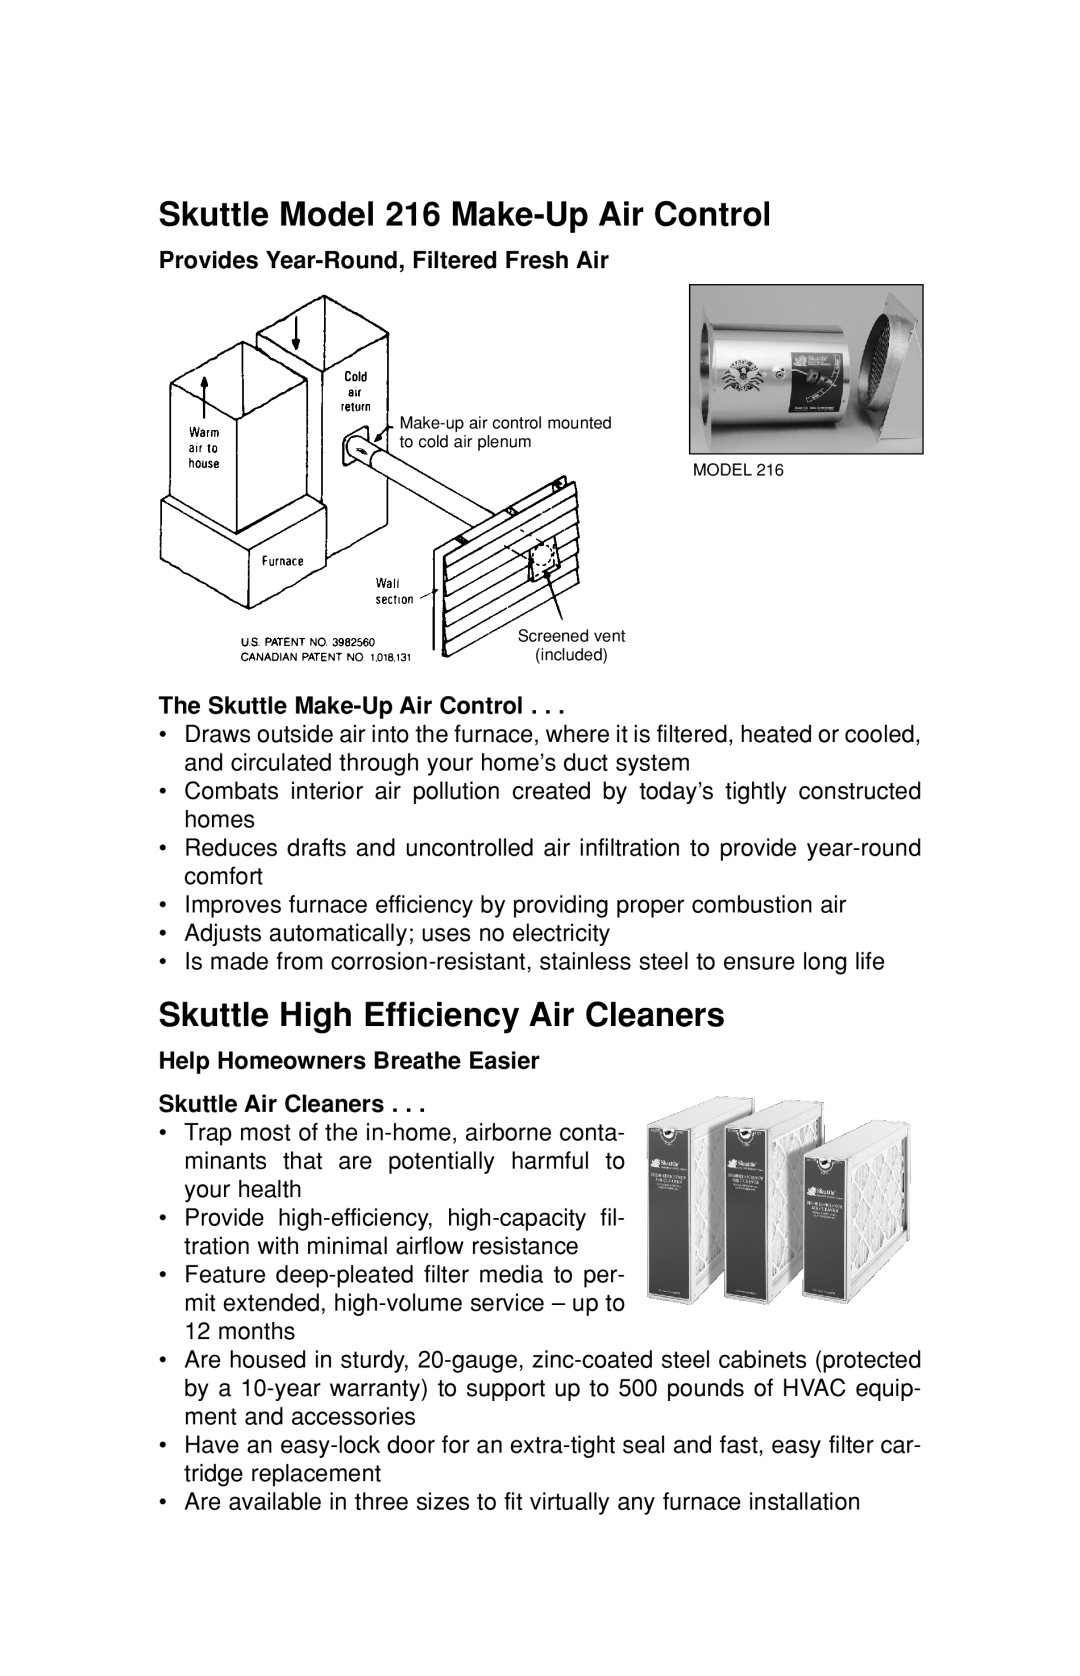 Skuttle Indoor Air Quality Products 45, 190 Skuttle Model 216 Make-UpAir Control, Skuttle High Efficiency Air Cleaners 